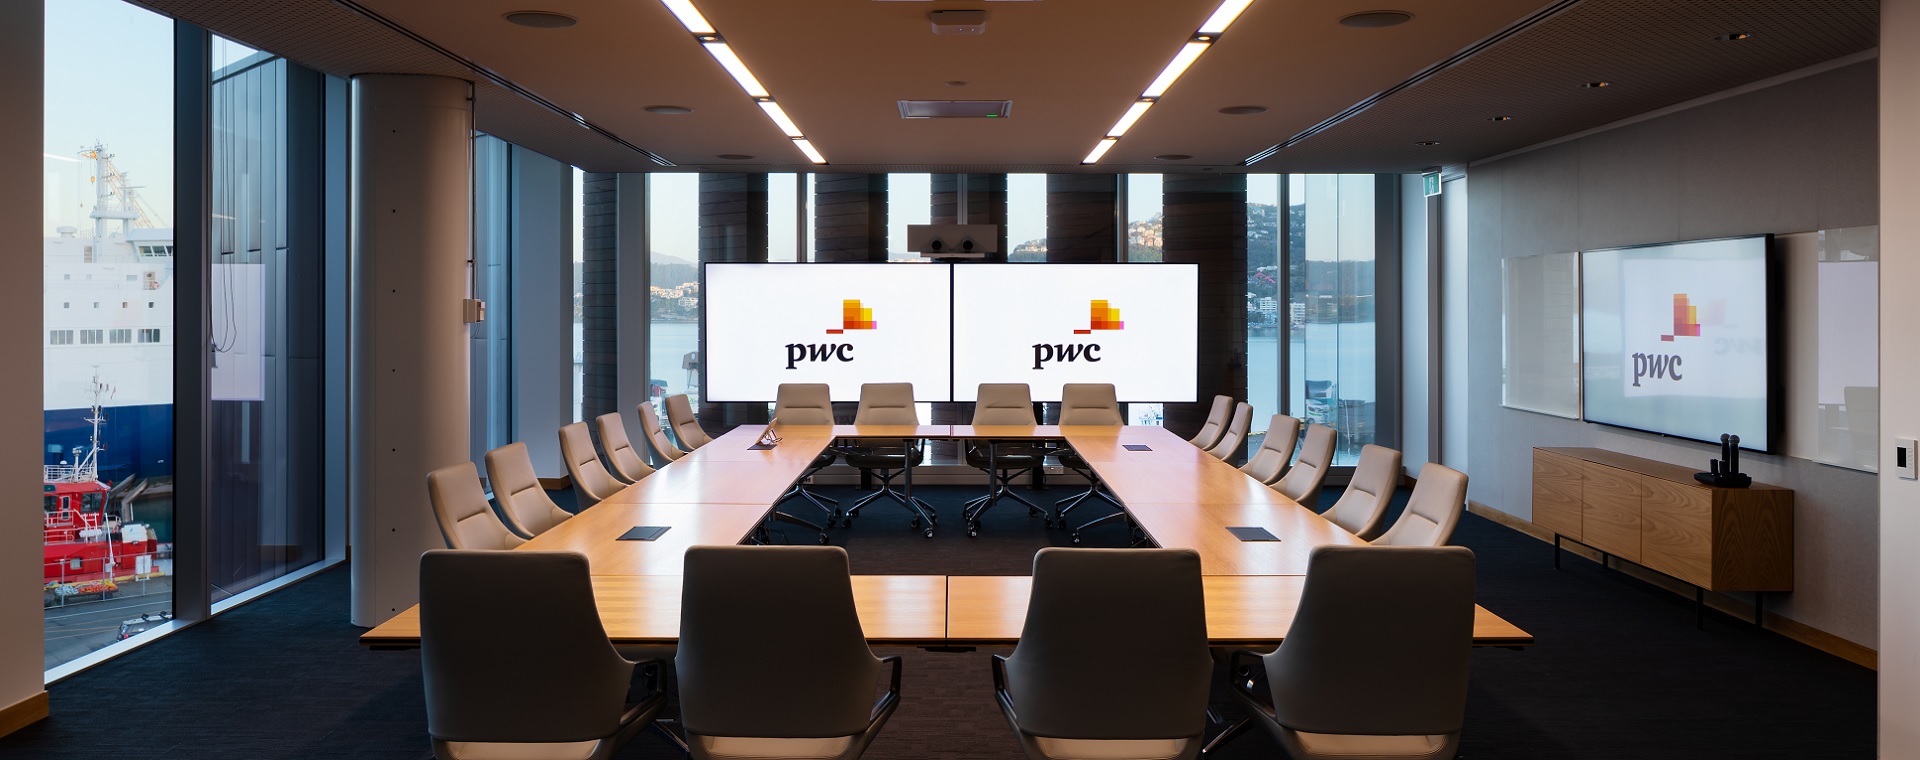 PwC large meeting room with board-room style seating and a 1 x 2 video wall for video conferencing and presentations